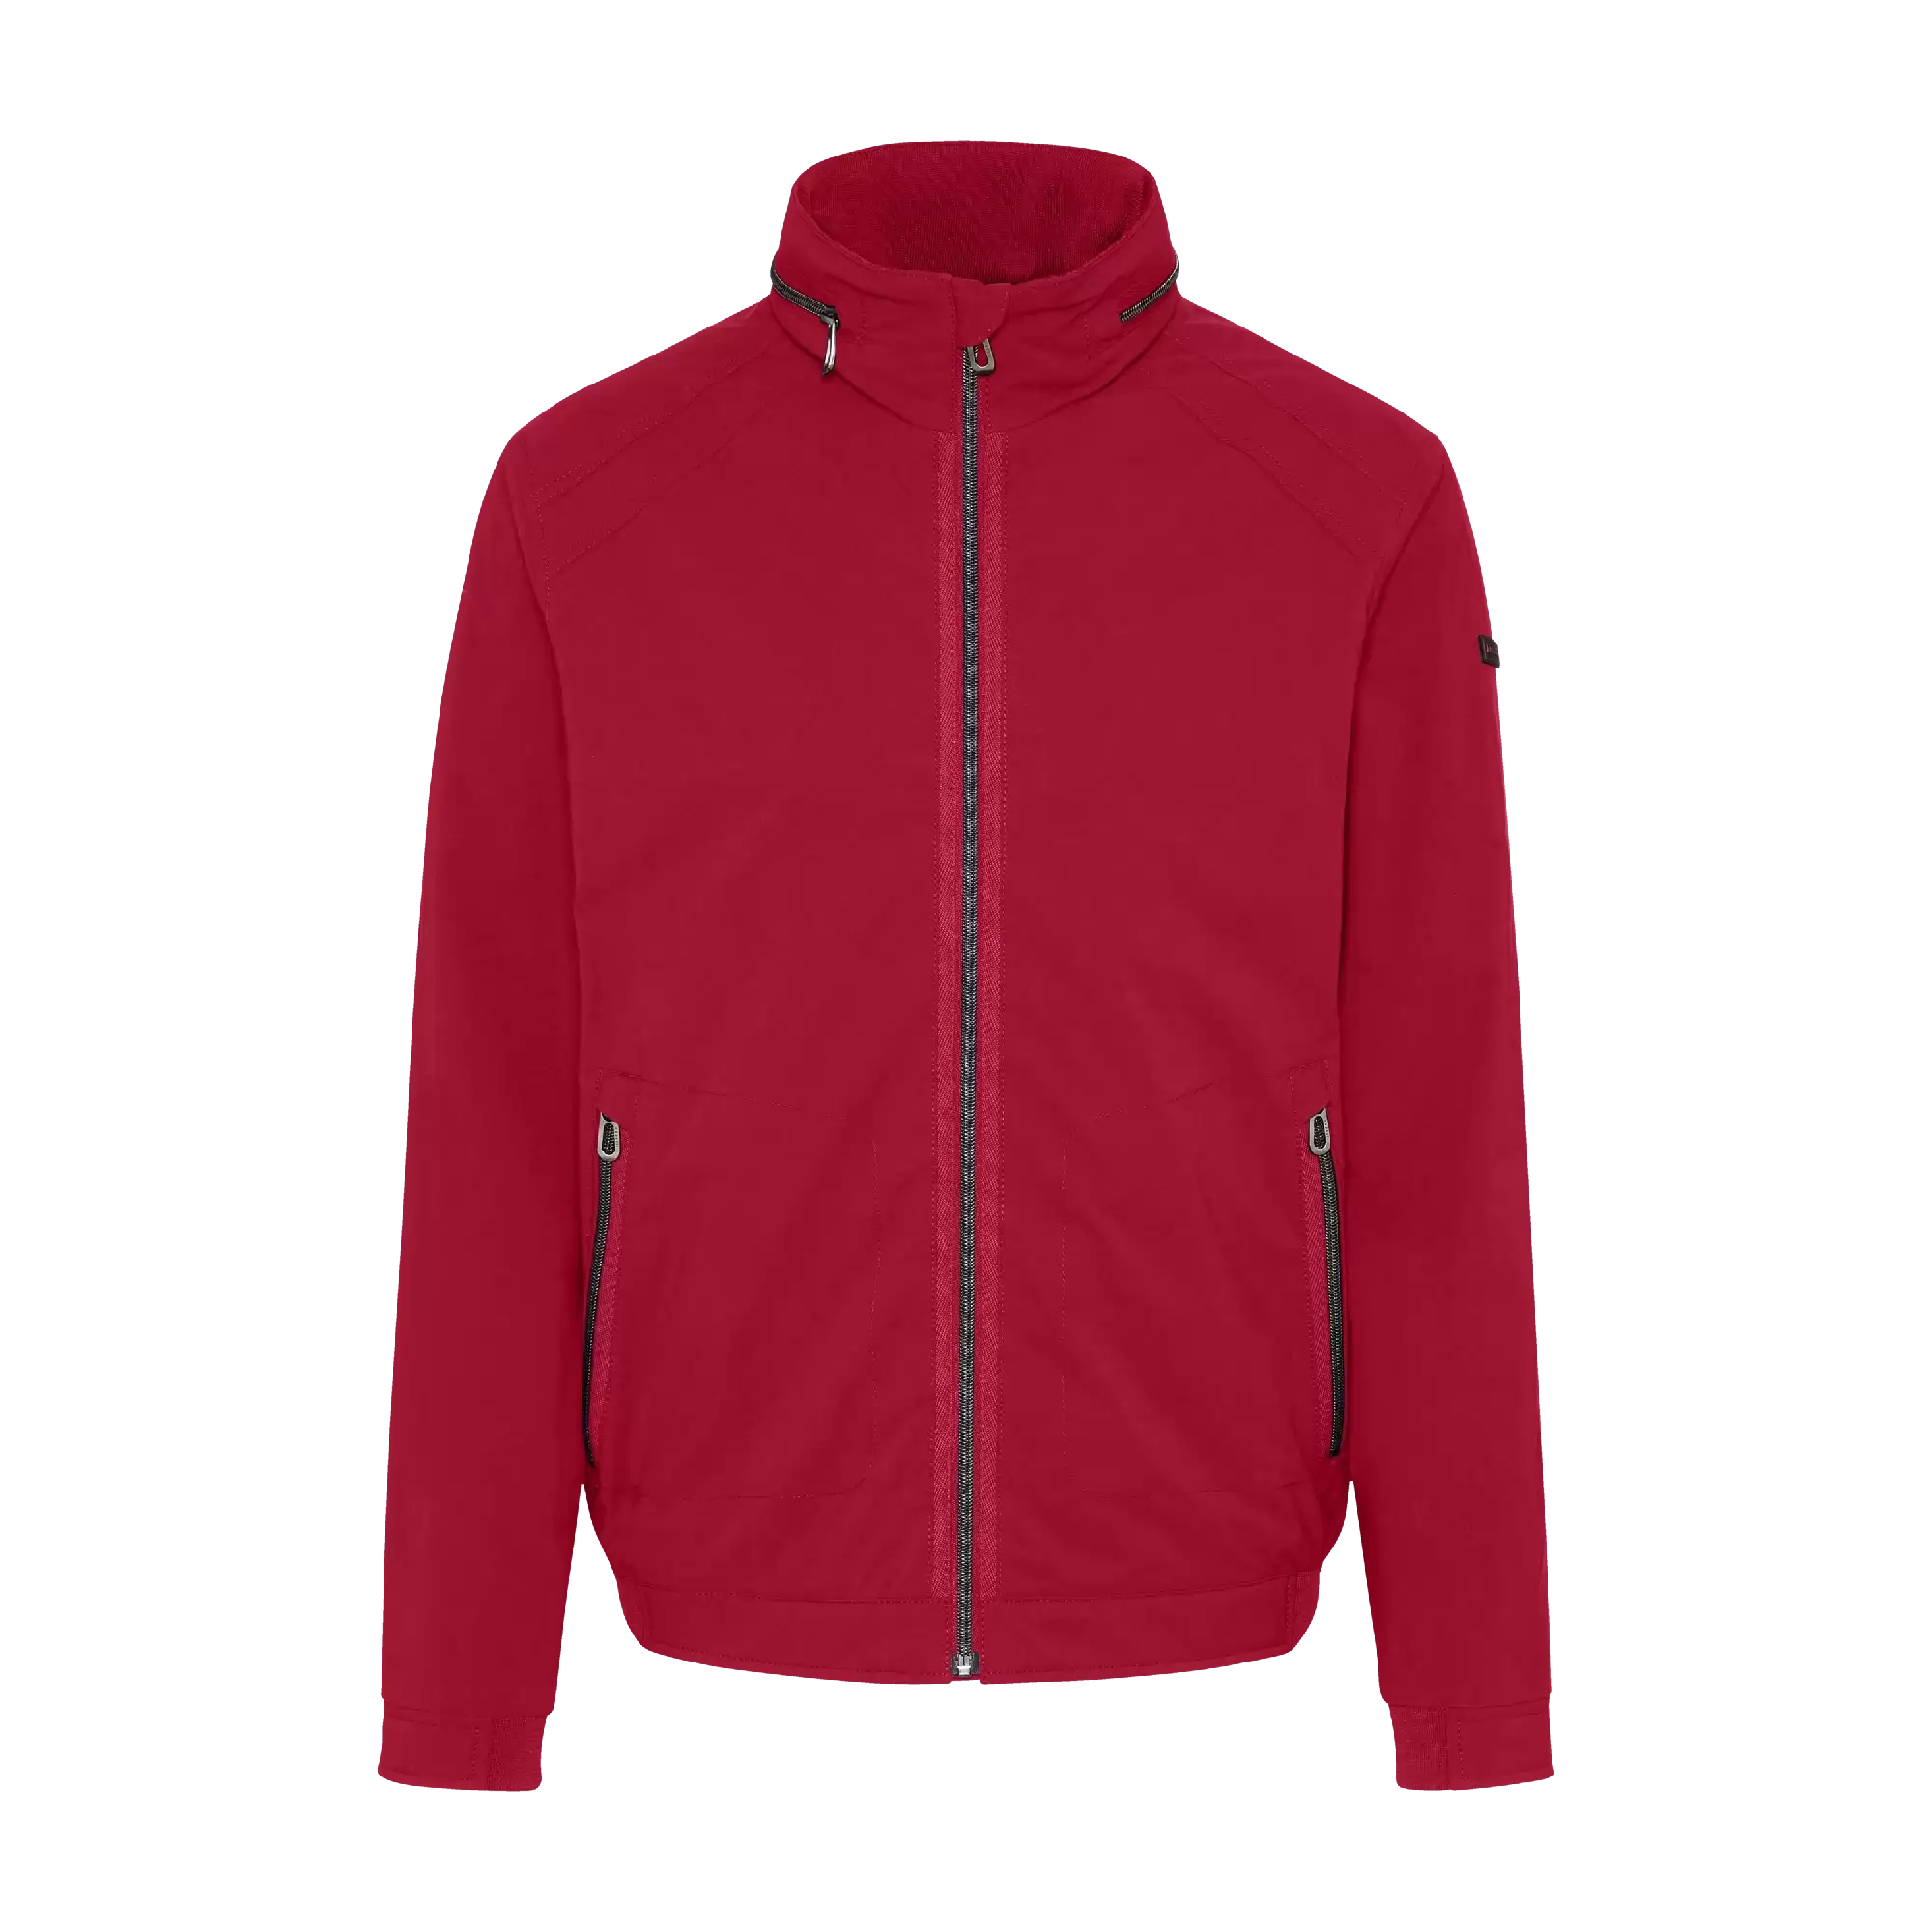 Lightweight jacket With knitted inserts at the sleeve hem in red